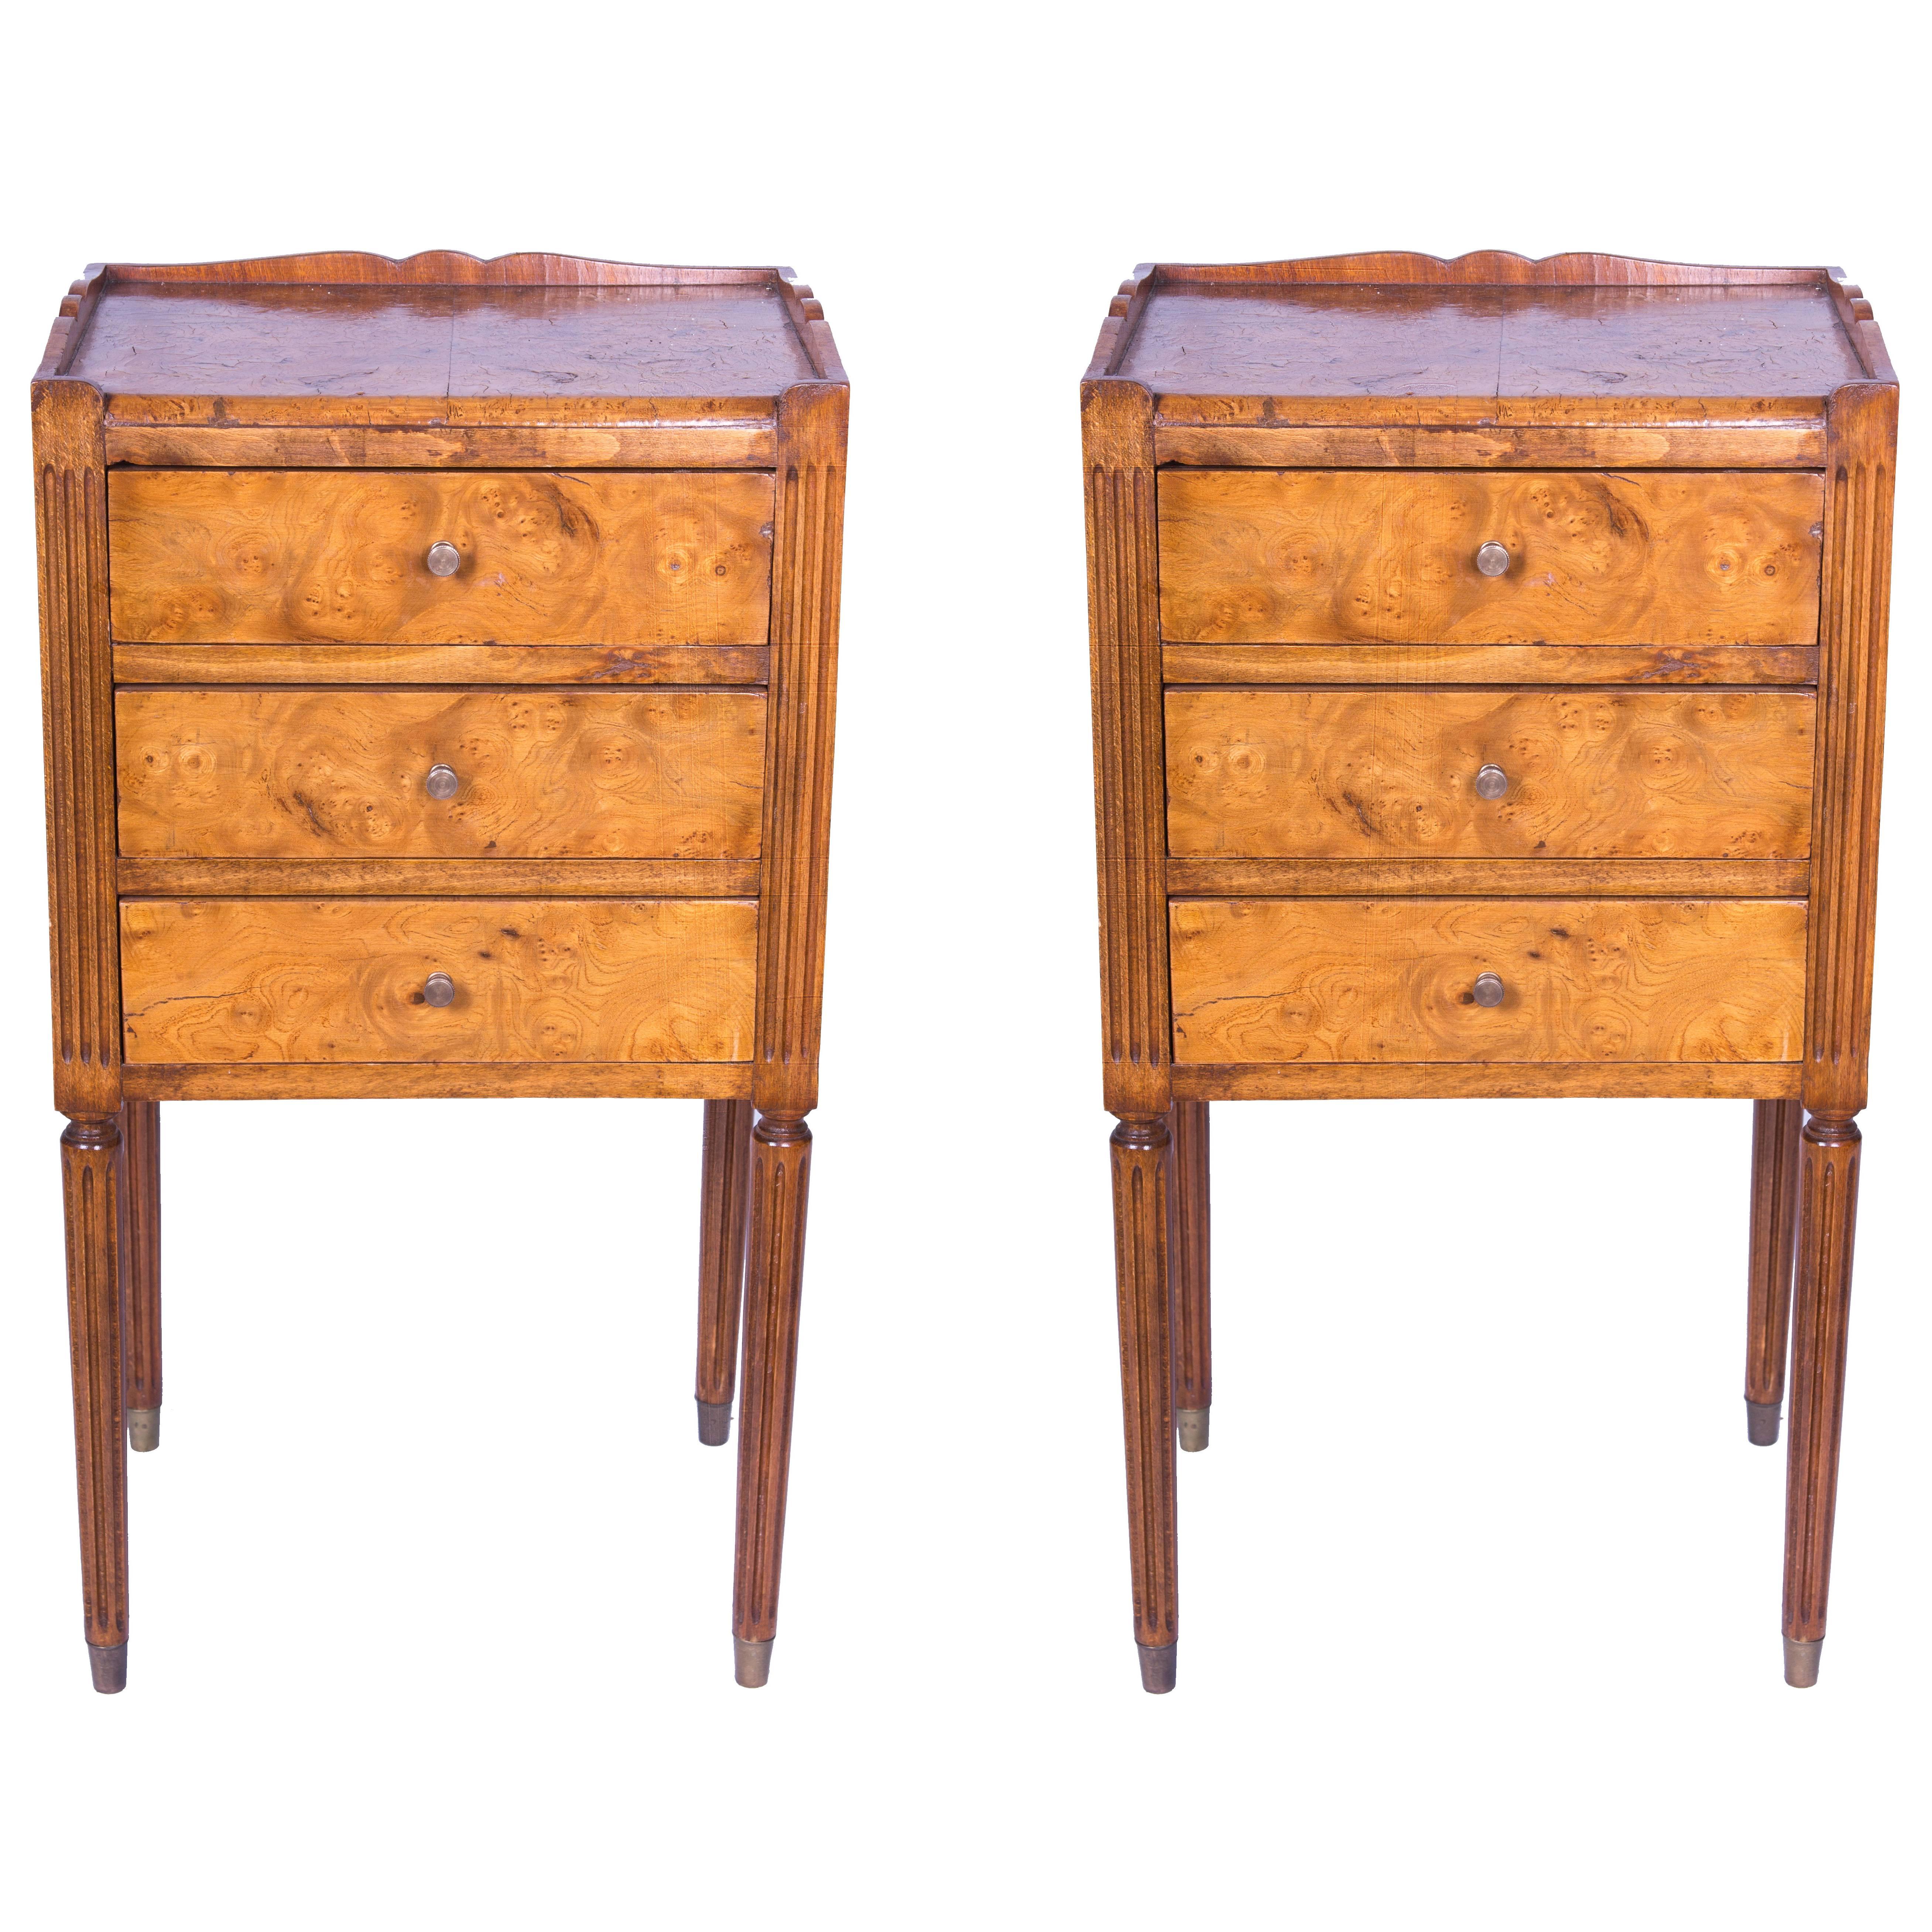 Pair of Burled Elm Continential Side Tables